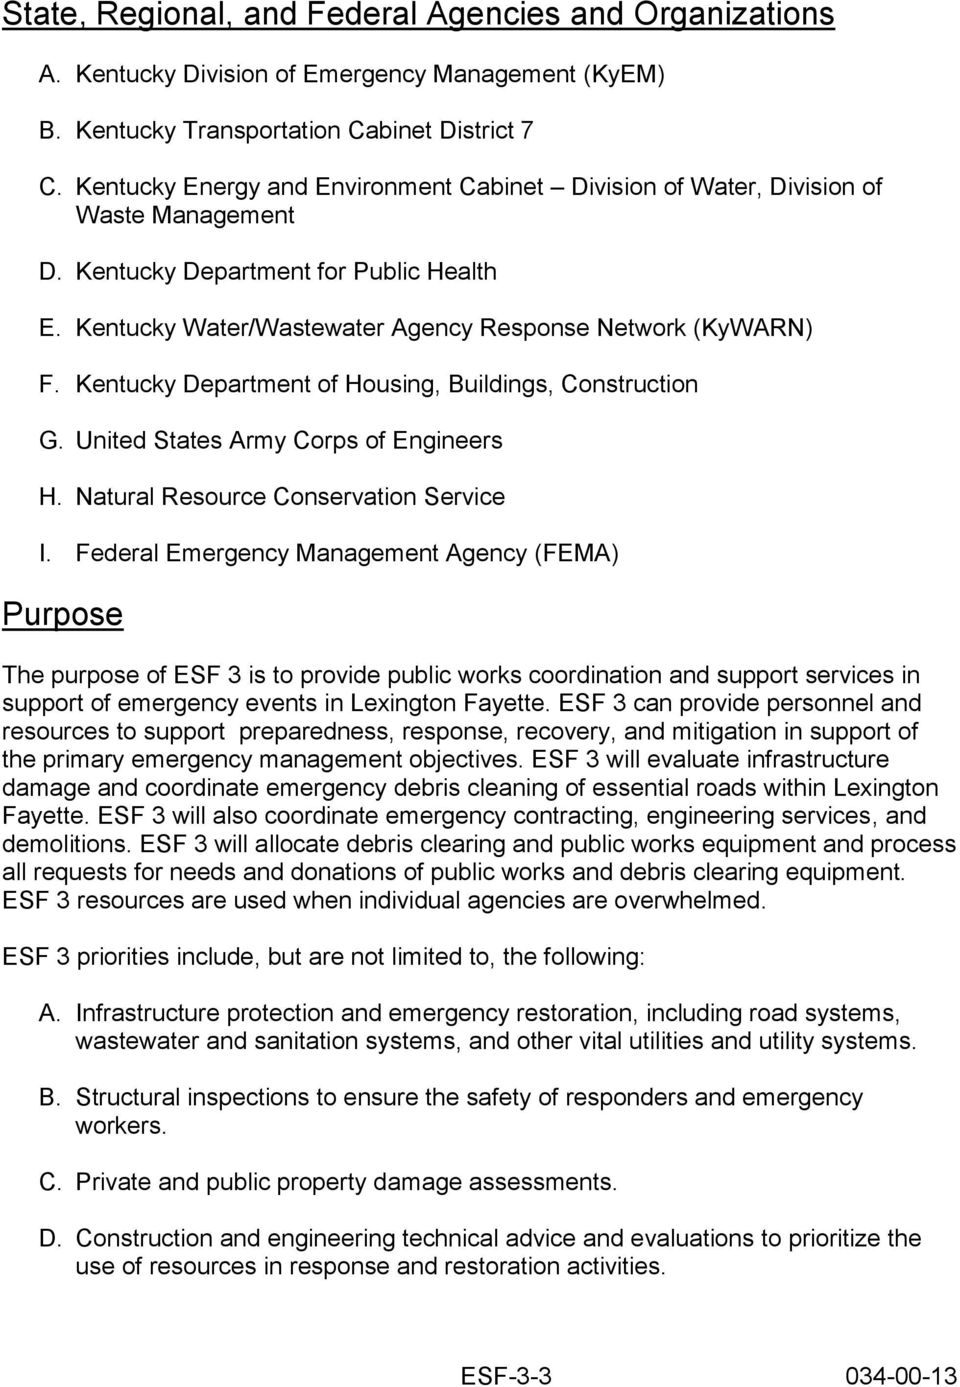 Kentucky Department of Housing, Buildings, Construction G. United States Army Corps of Engineers H. Natural Resource Conservation Service I.